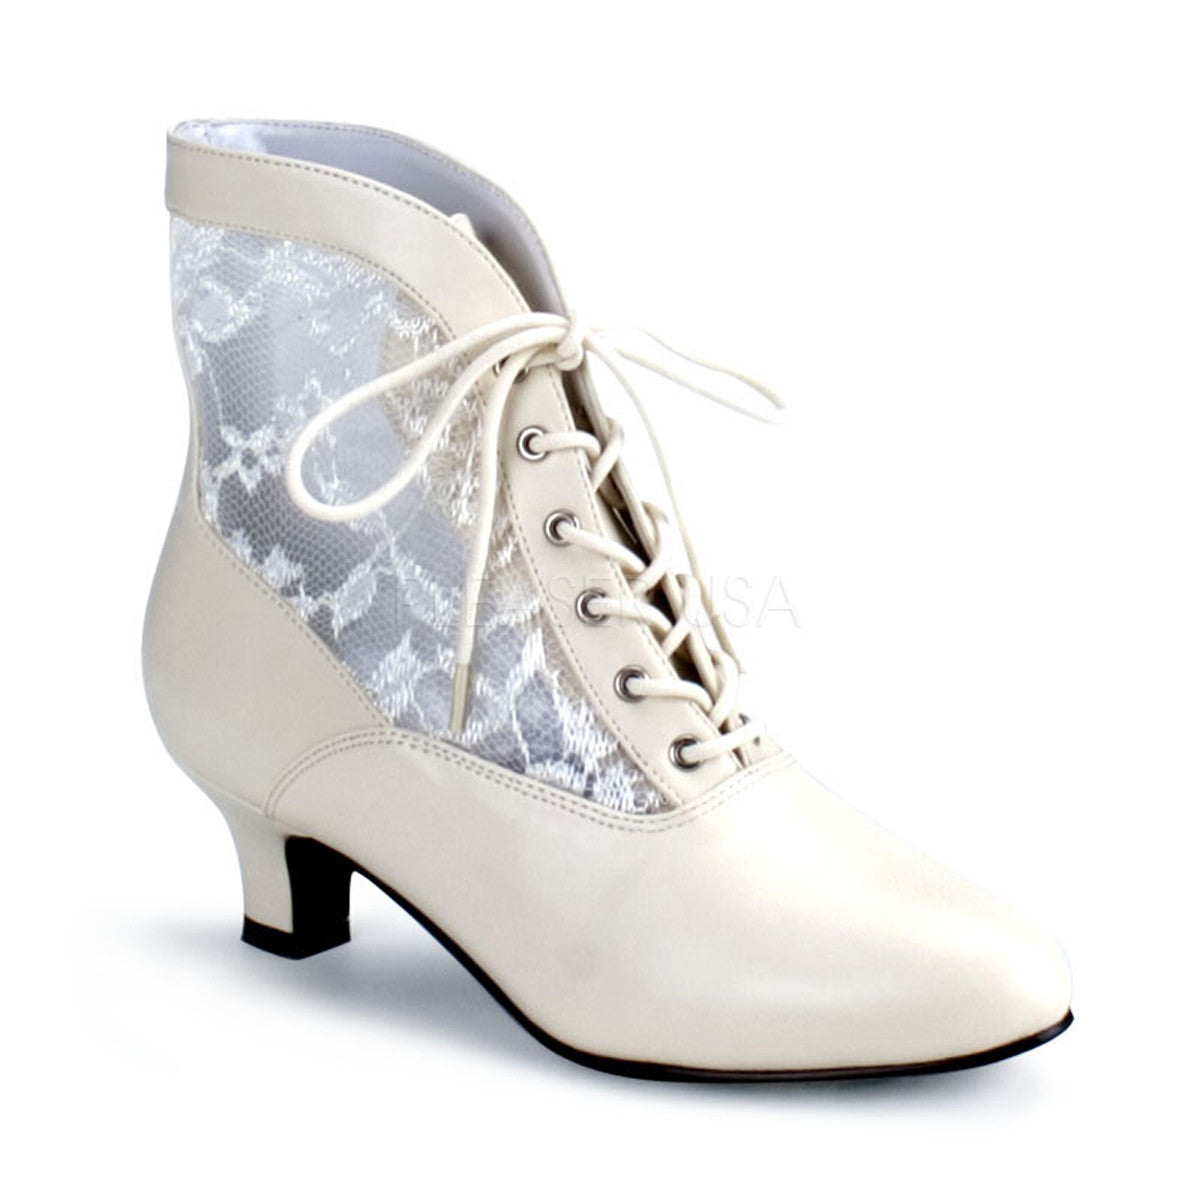 FUNTASMA DAME-05 Ivory Victorian Granny Boots With Lace Accent - Shoecup.com